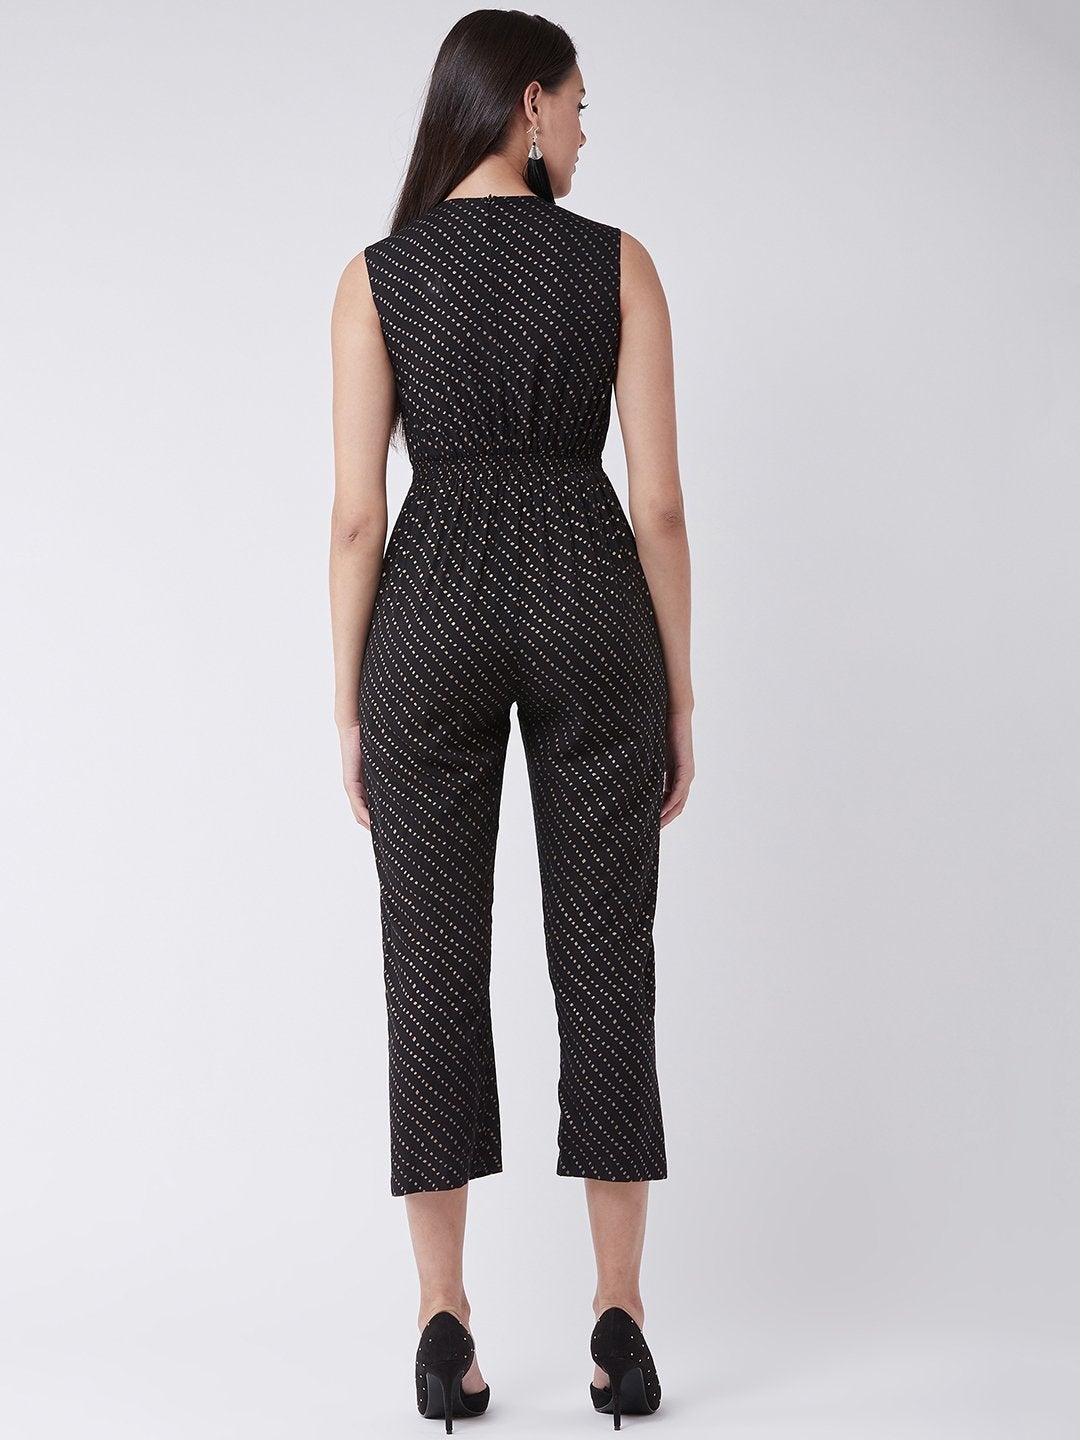 Women's Foil Printed Jumpsuit With Stylish Jacket - Pannkh